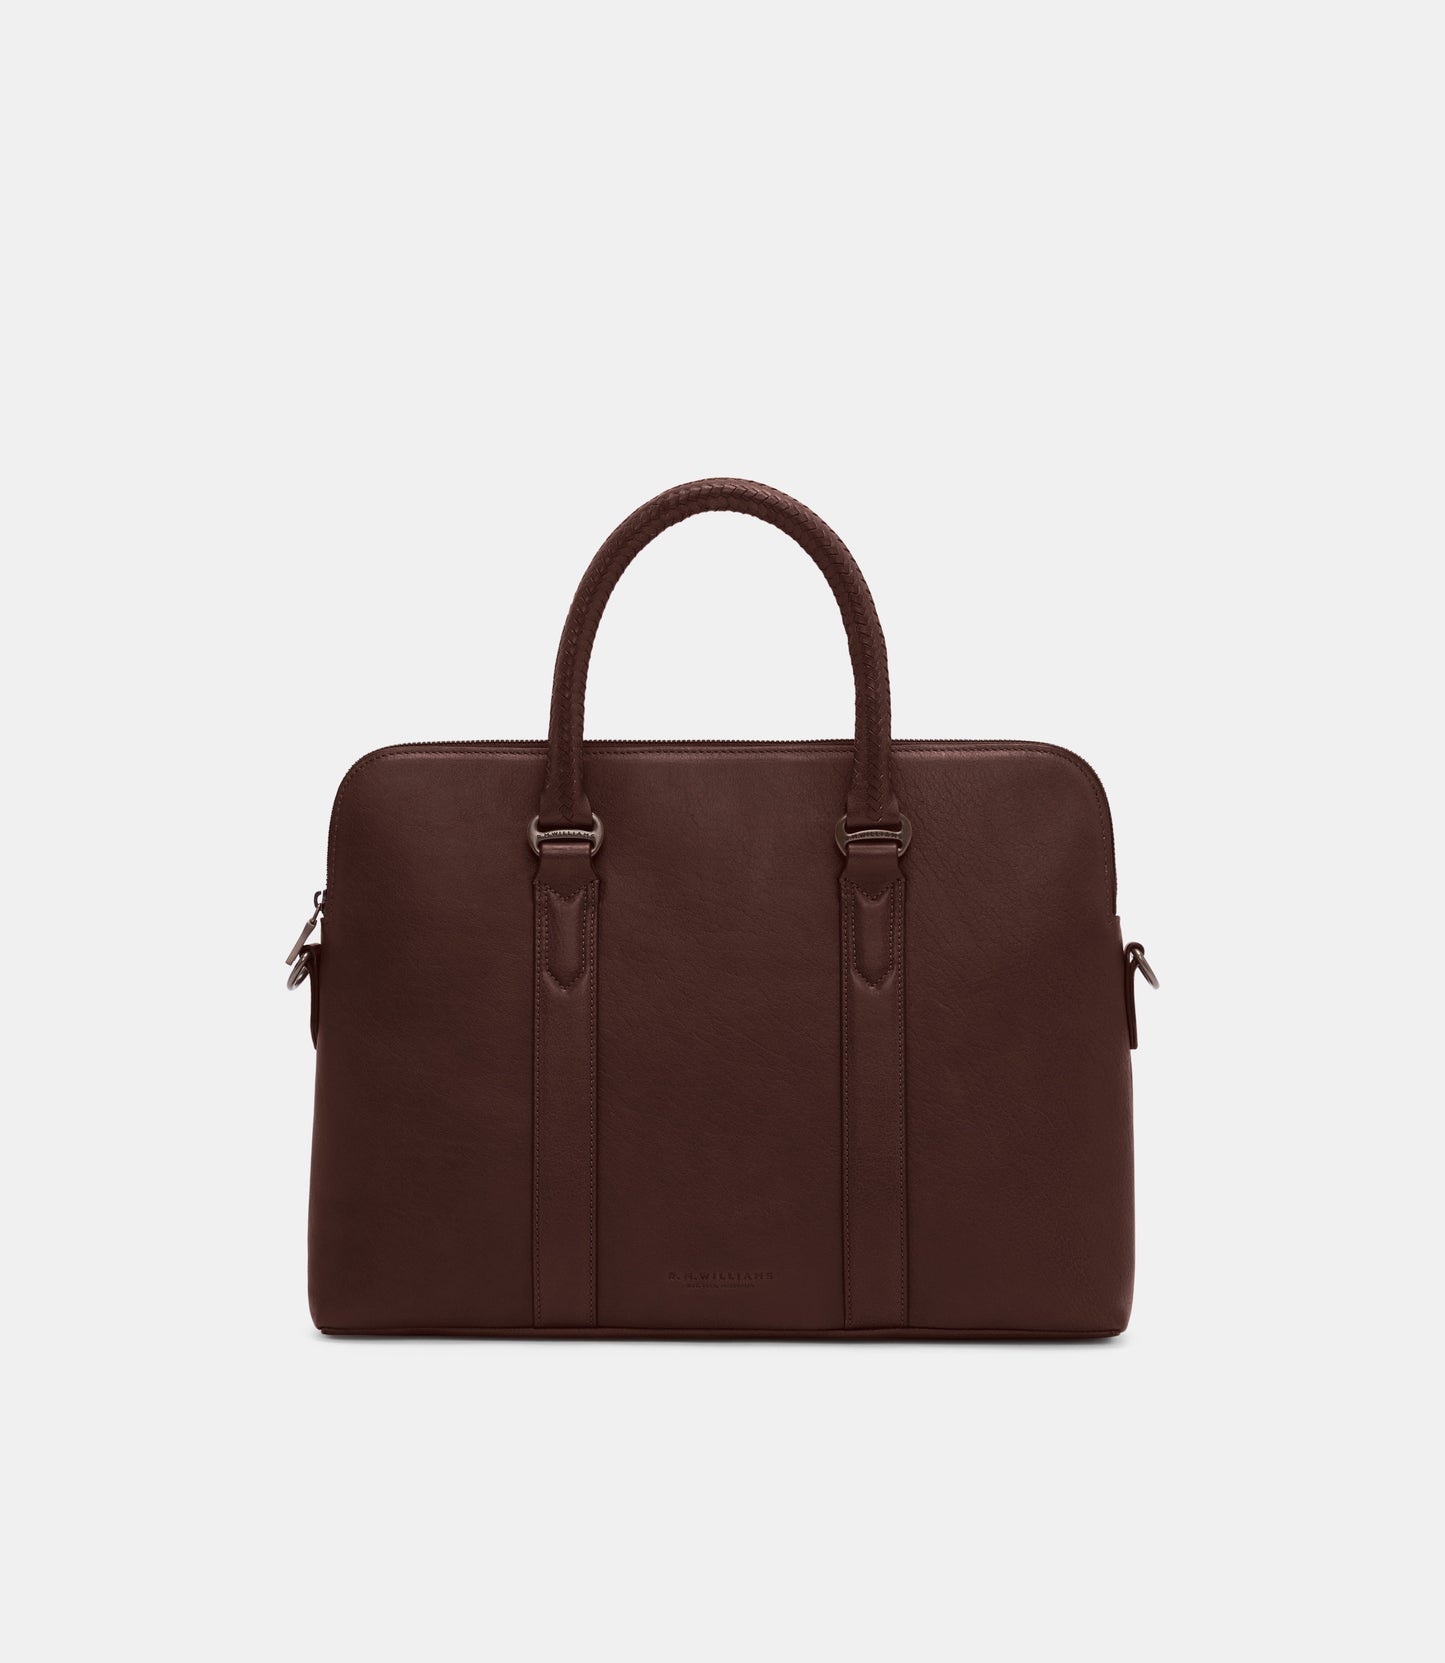 RM Williams W24 Farrier Briefcase - Whiskey